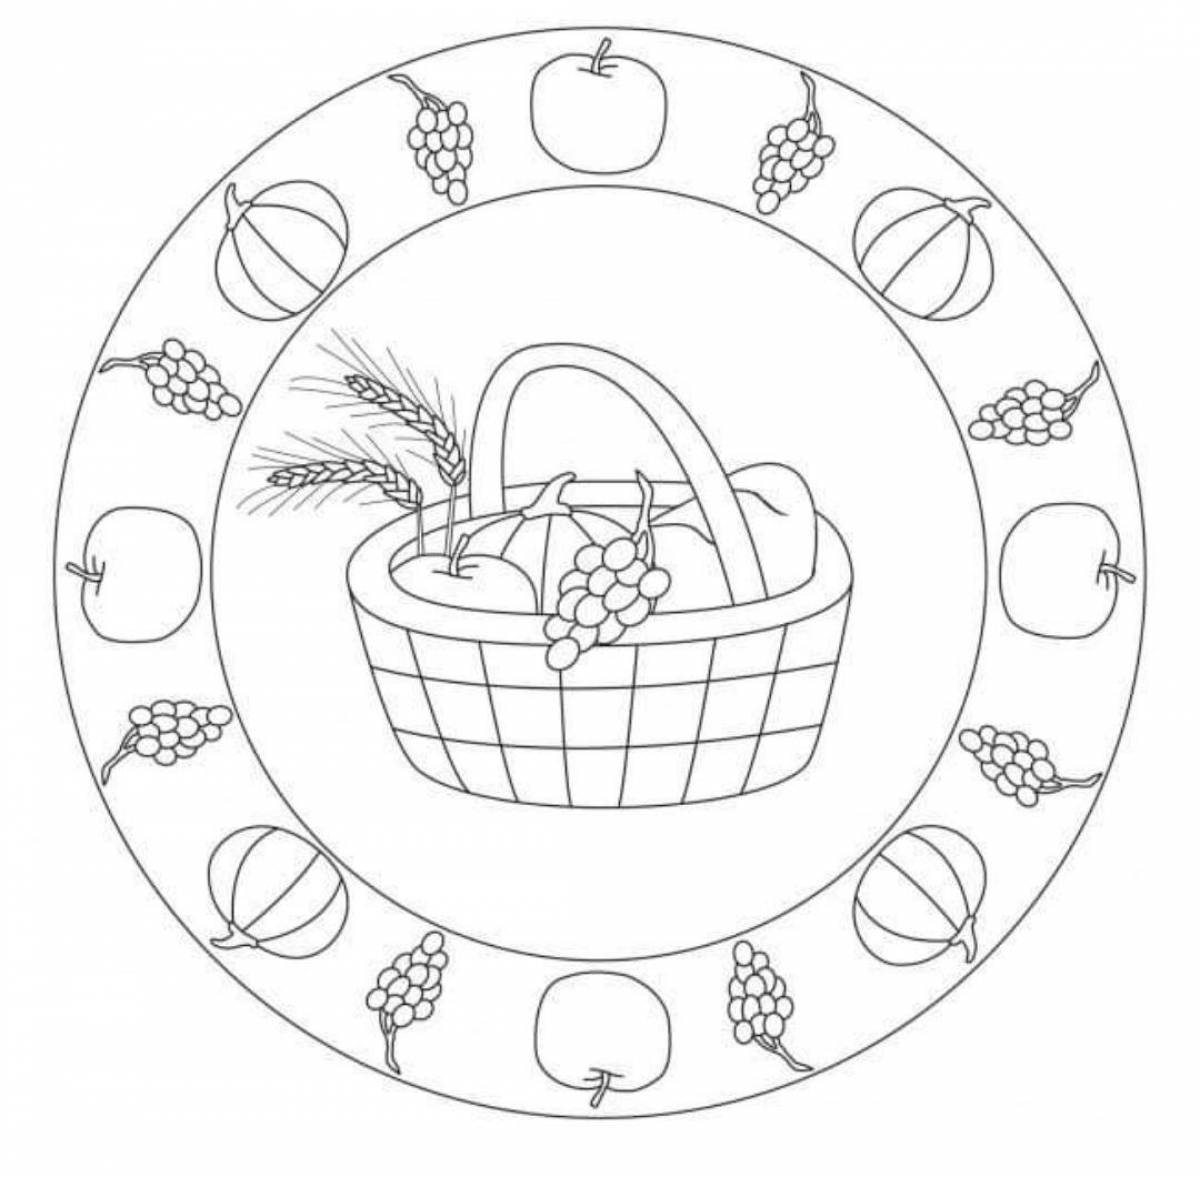 Living plate drawing